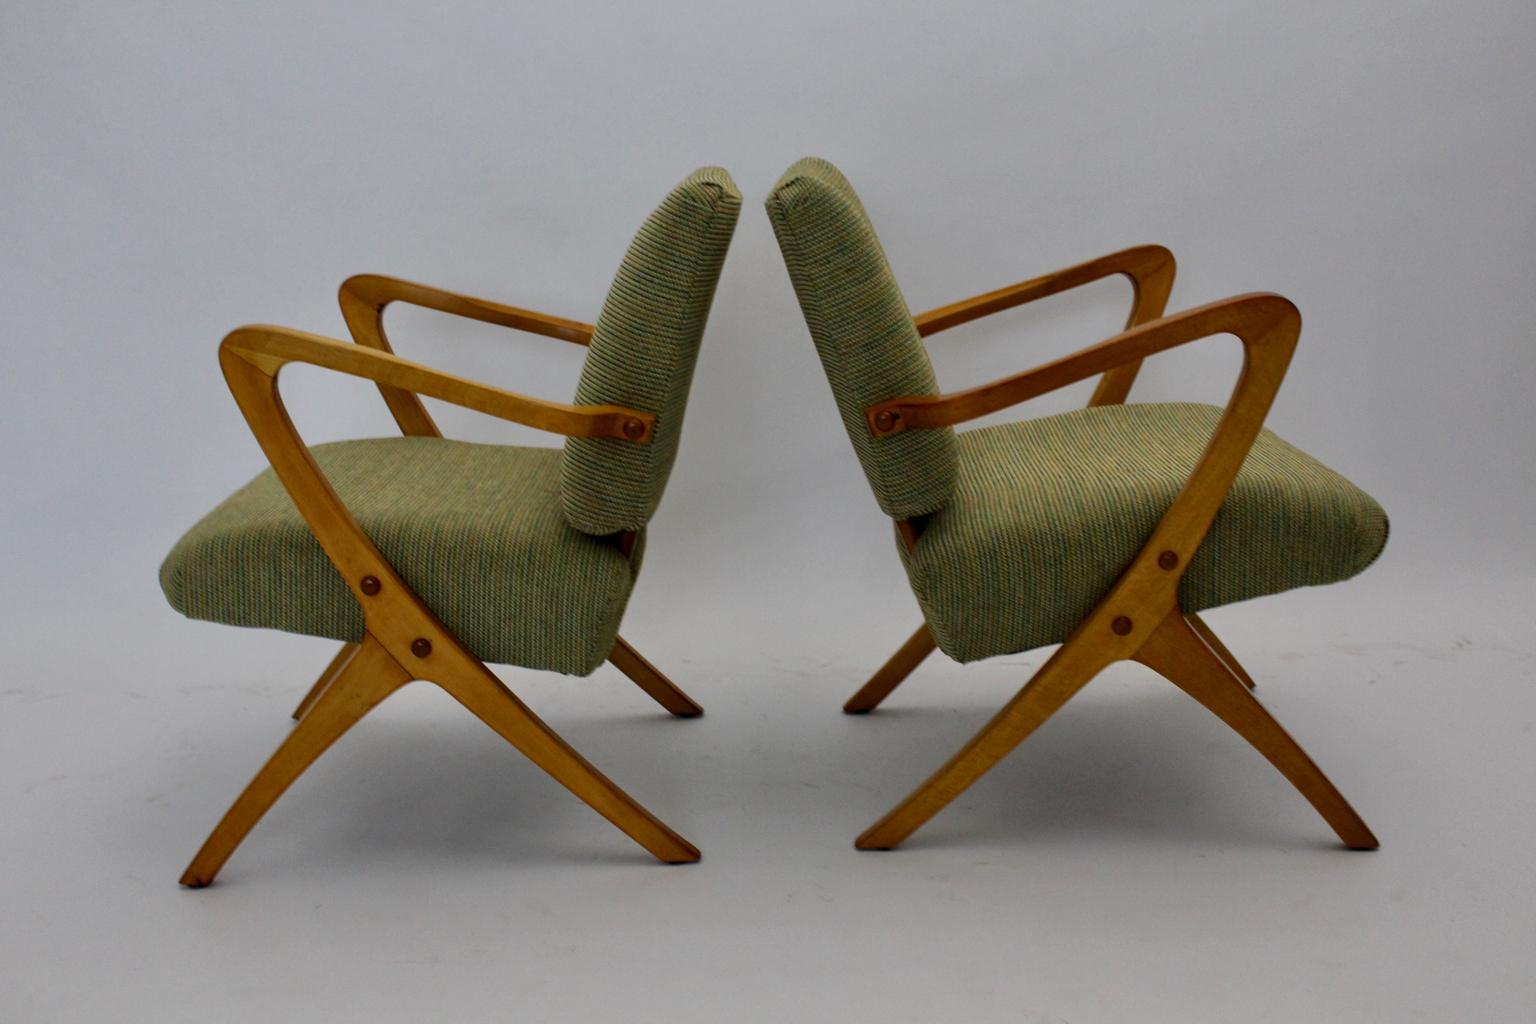 Green beech vintage mid century modern armchairs or lounge chairs, which shows the model number F3 Soziale Wohnkultur, SW, 1950s Vienna.
Soziale Wohnkultur provided designs amongst others by Franz Schuster, Roland Rainer and Oskar Payer.
The frame